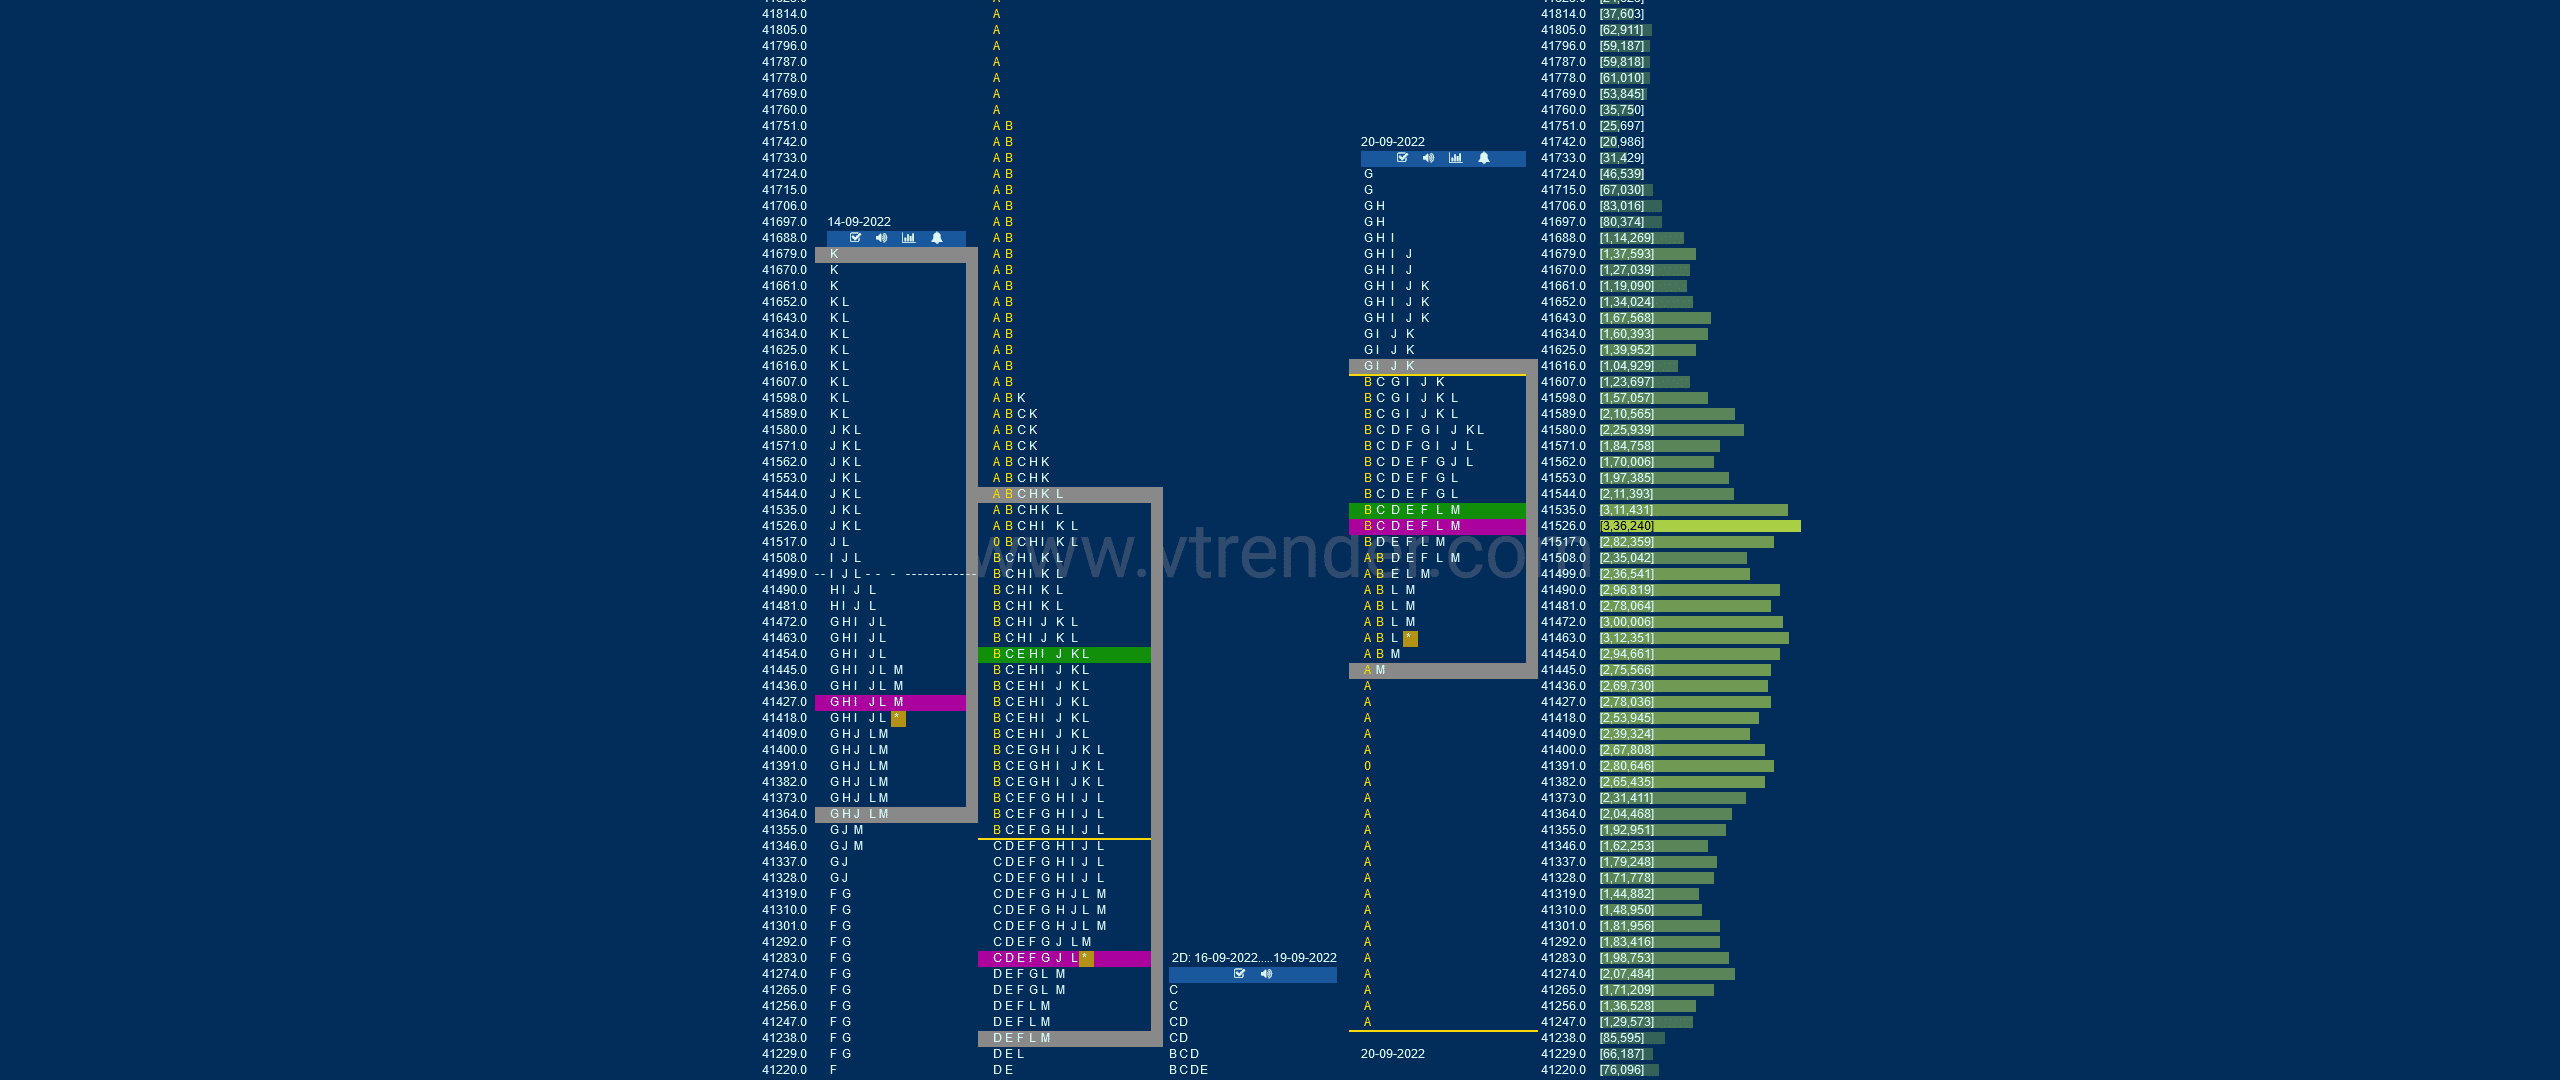 Bnf 13 Market Profile Analysis Dated 20Th Sep 2022 Banknifty Futures, Charts, Day Trading, Intraday Trading, Intraday Trading Strategies, Market Profile, Market Profile Trading Strategies, Nifty Futures, Order Flow Analysis, Support And Resistance, Technical Analysis, Trading Strategies, Volume Profile Trading